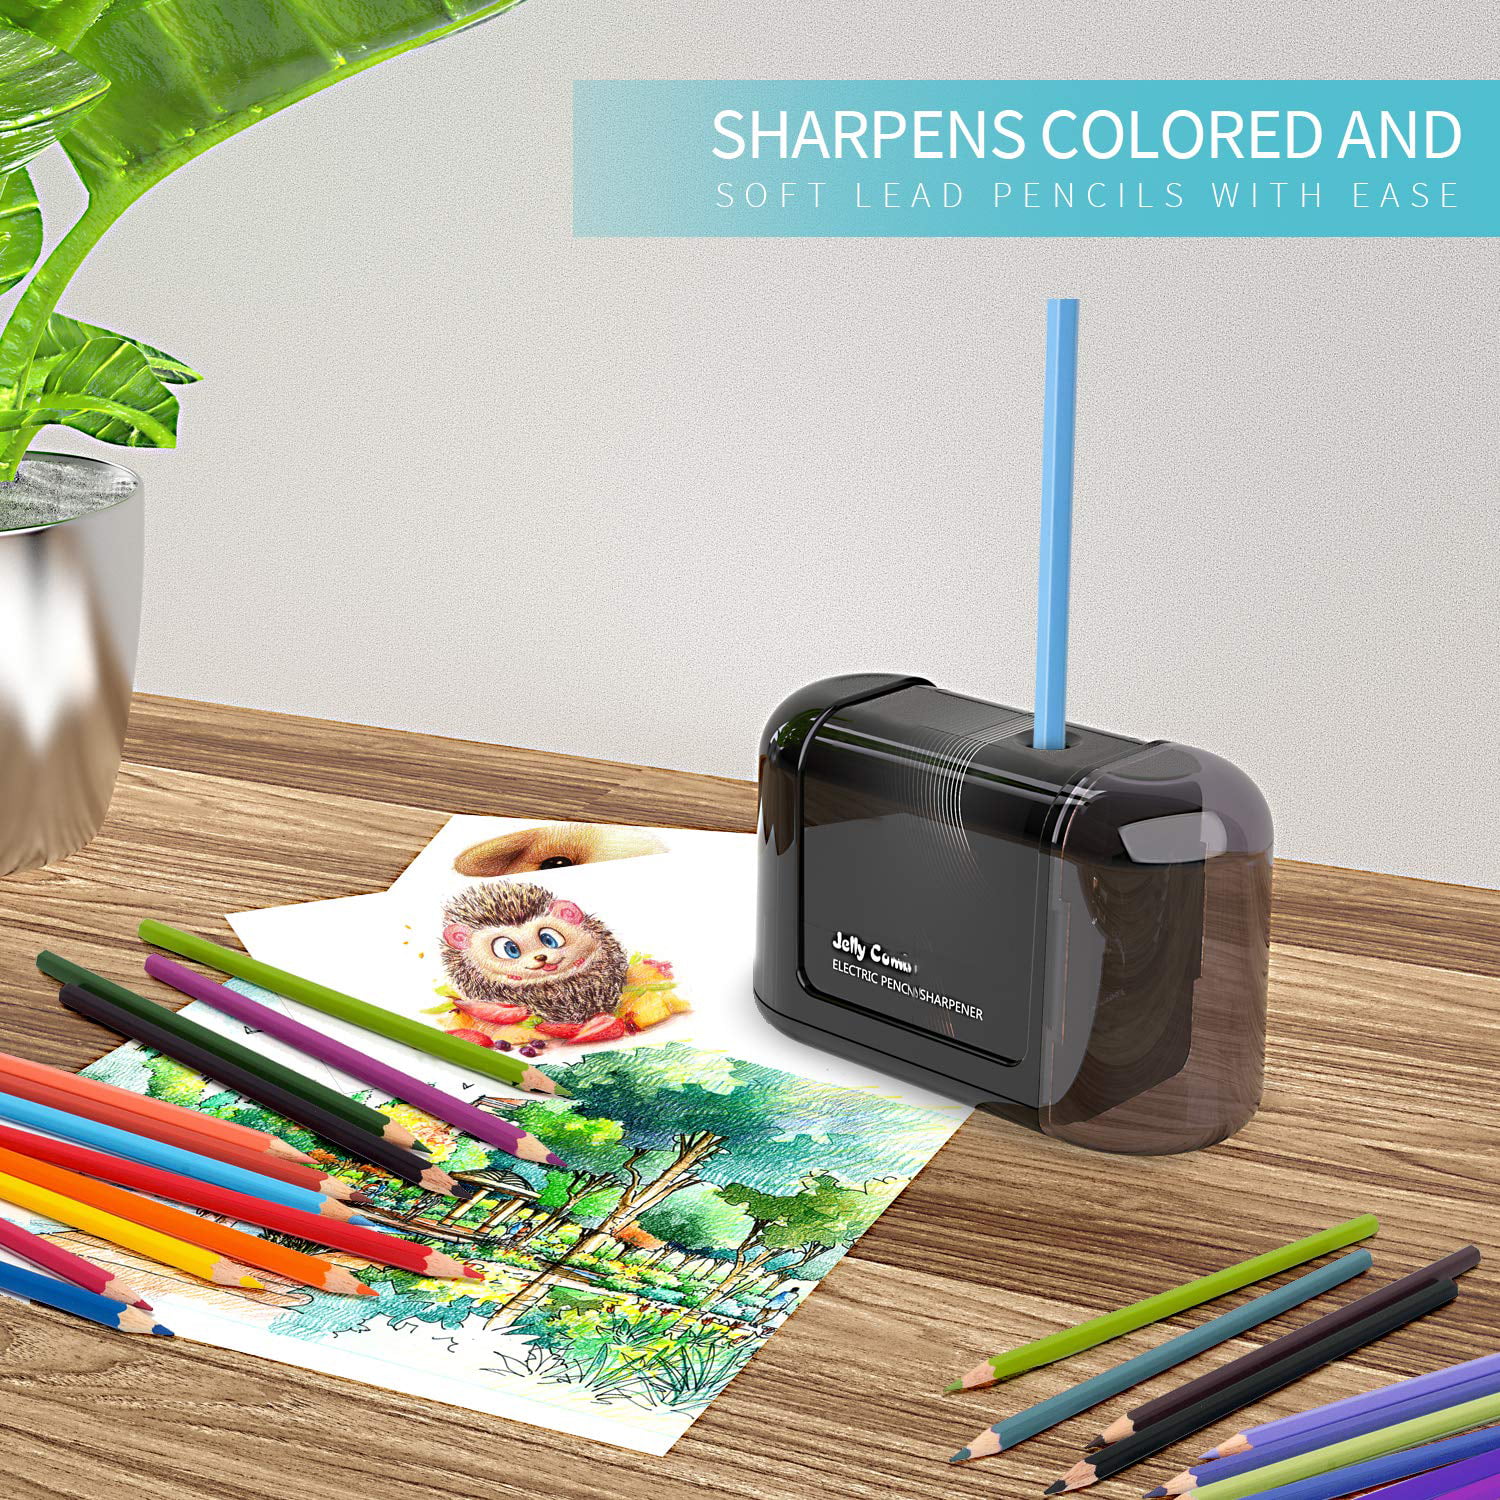 Jelly Comb Battery Operated Pencil Sharpener Ideal for No.2 and Colored Pencils Safety Design for Classroom,Home Students Electric Pencil Sharpener Office Artist No Cord